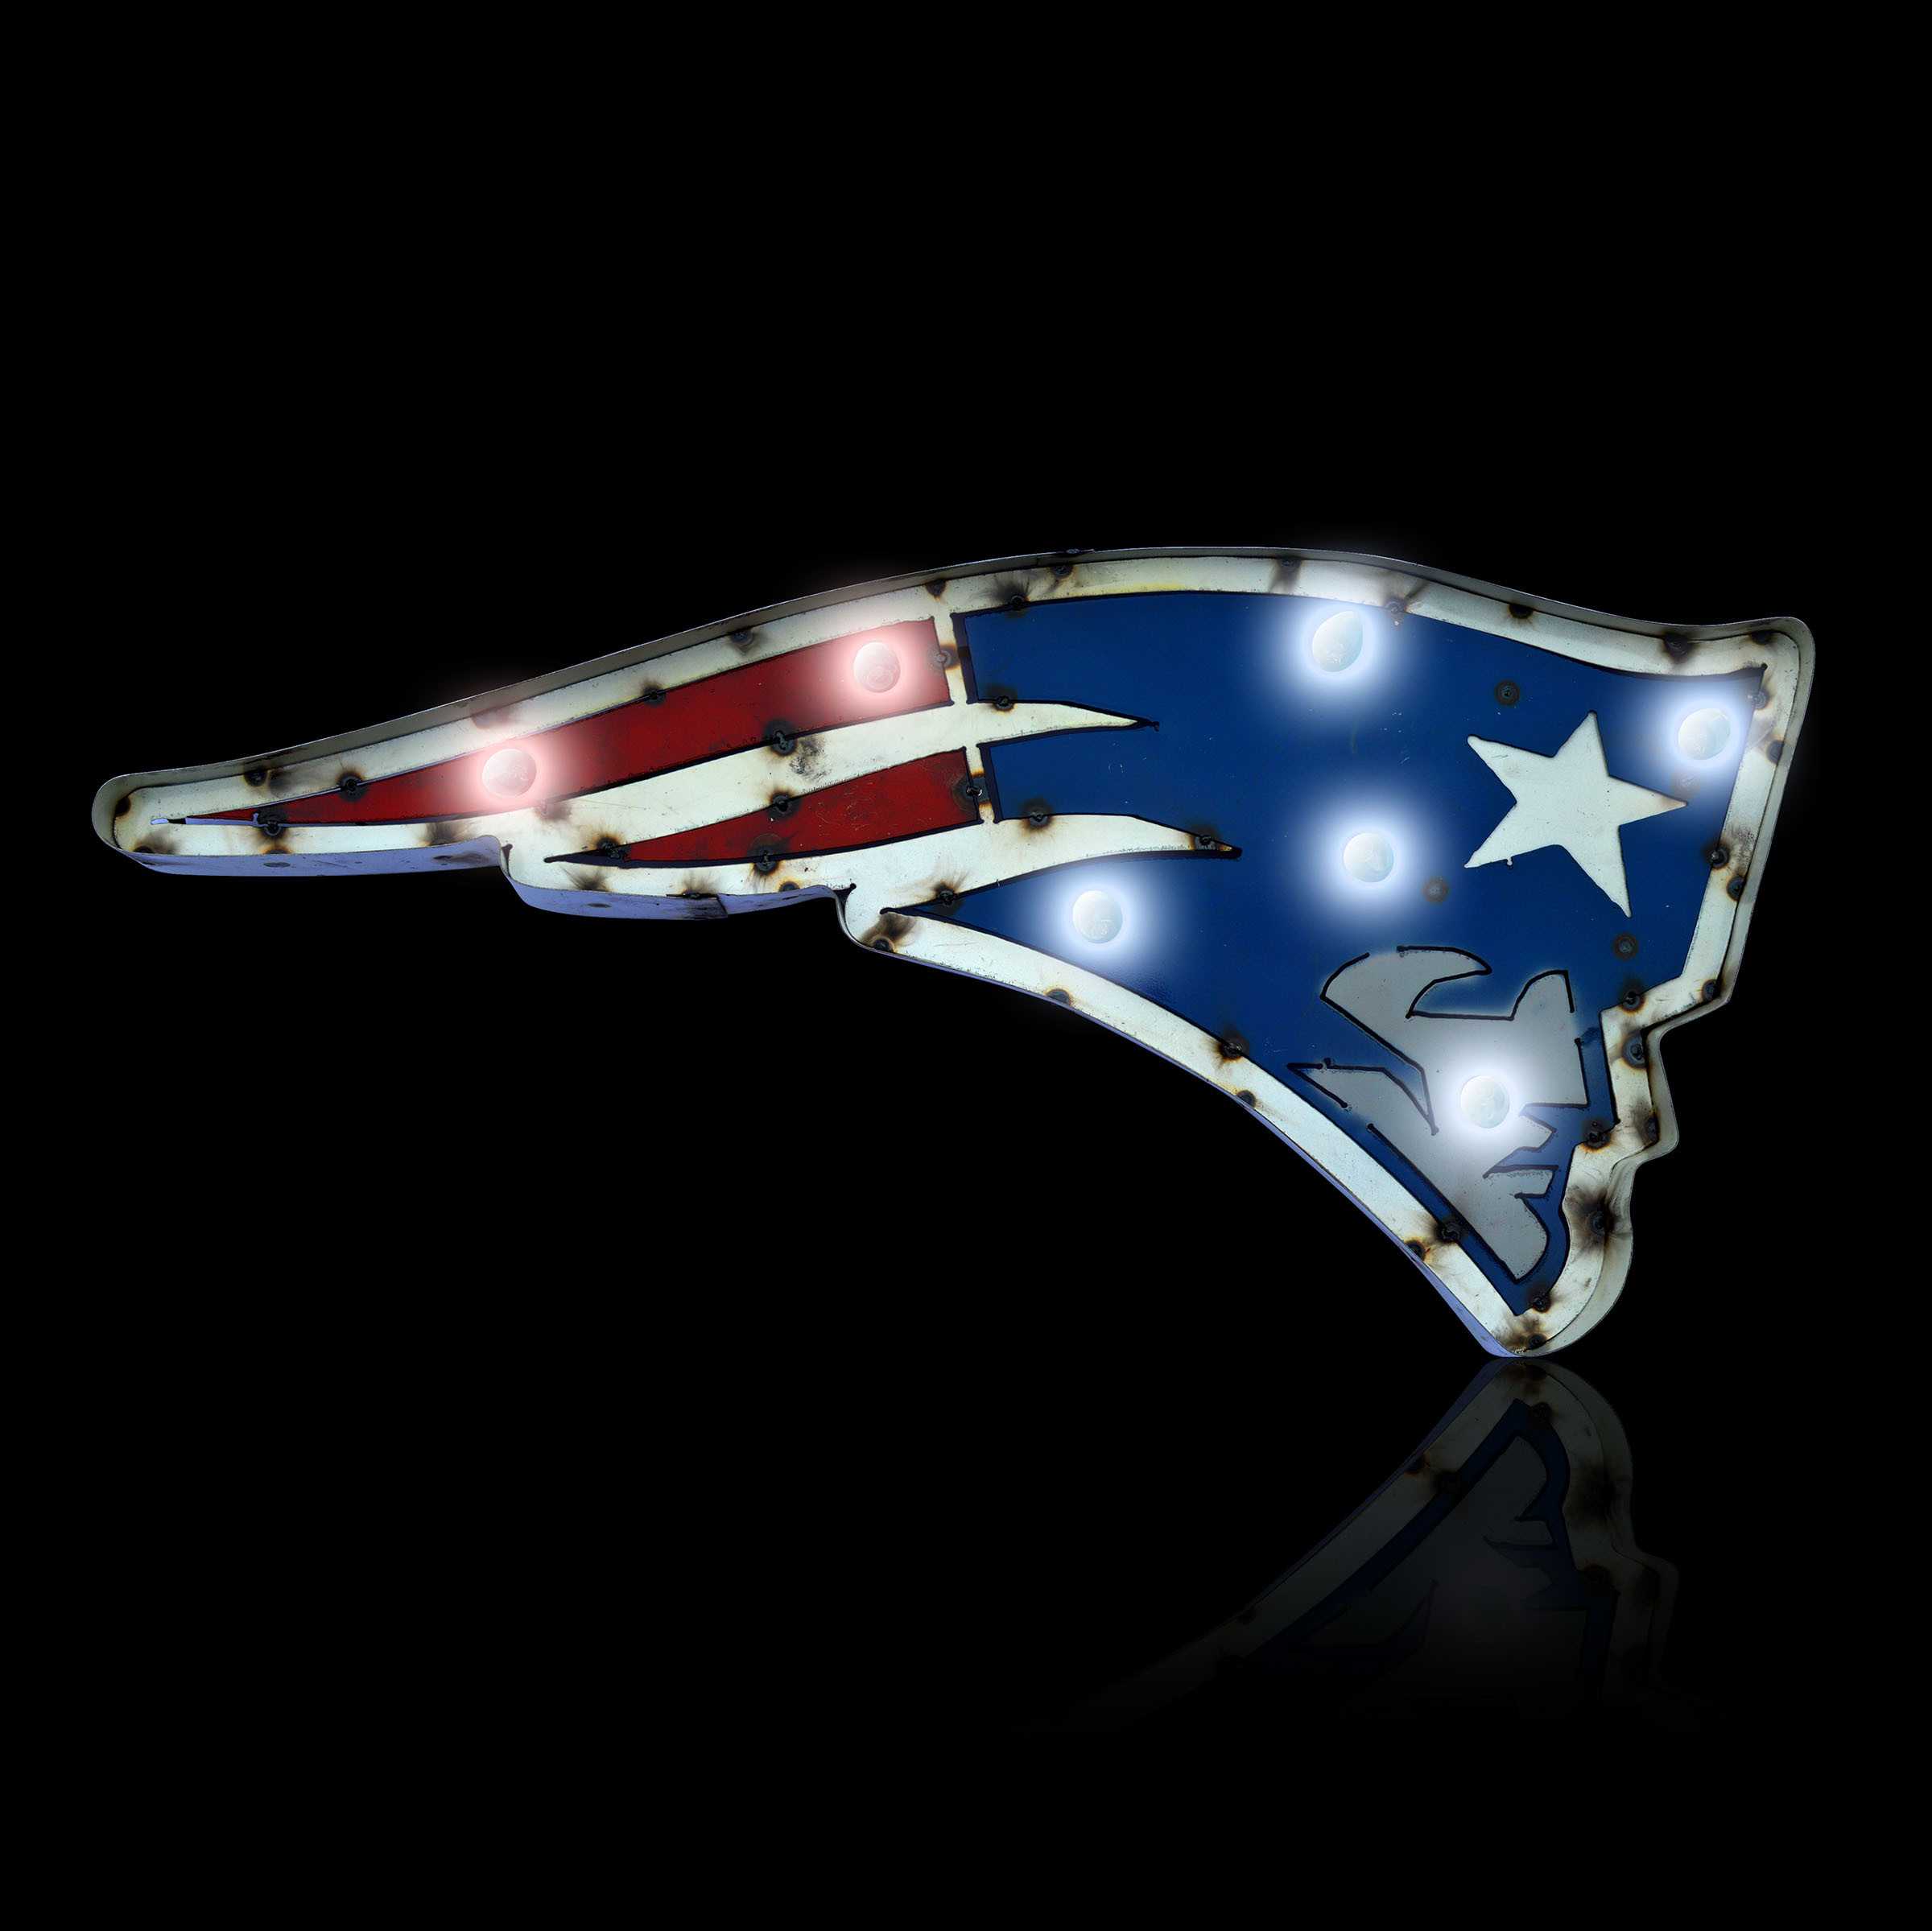 New England Patriots Logo Lighted Recycled Metal Sign